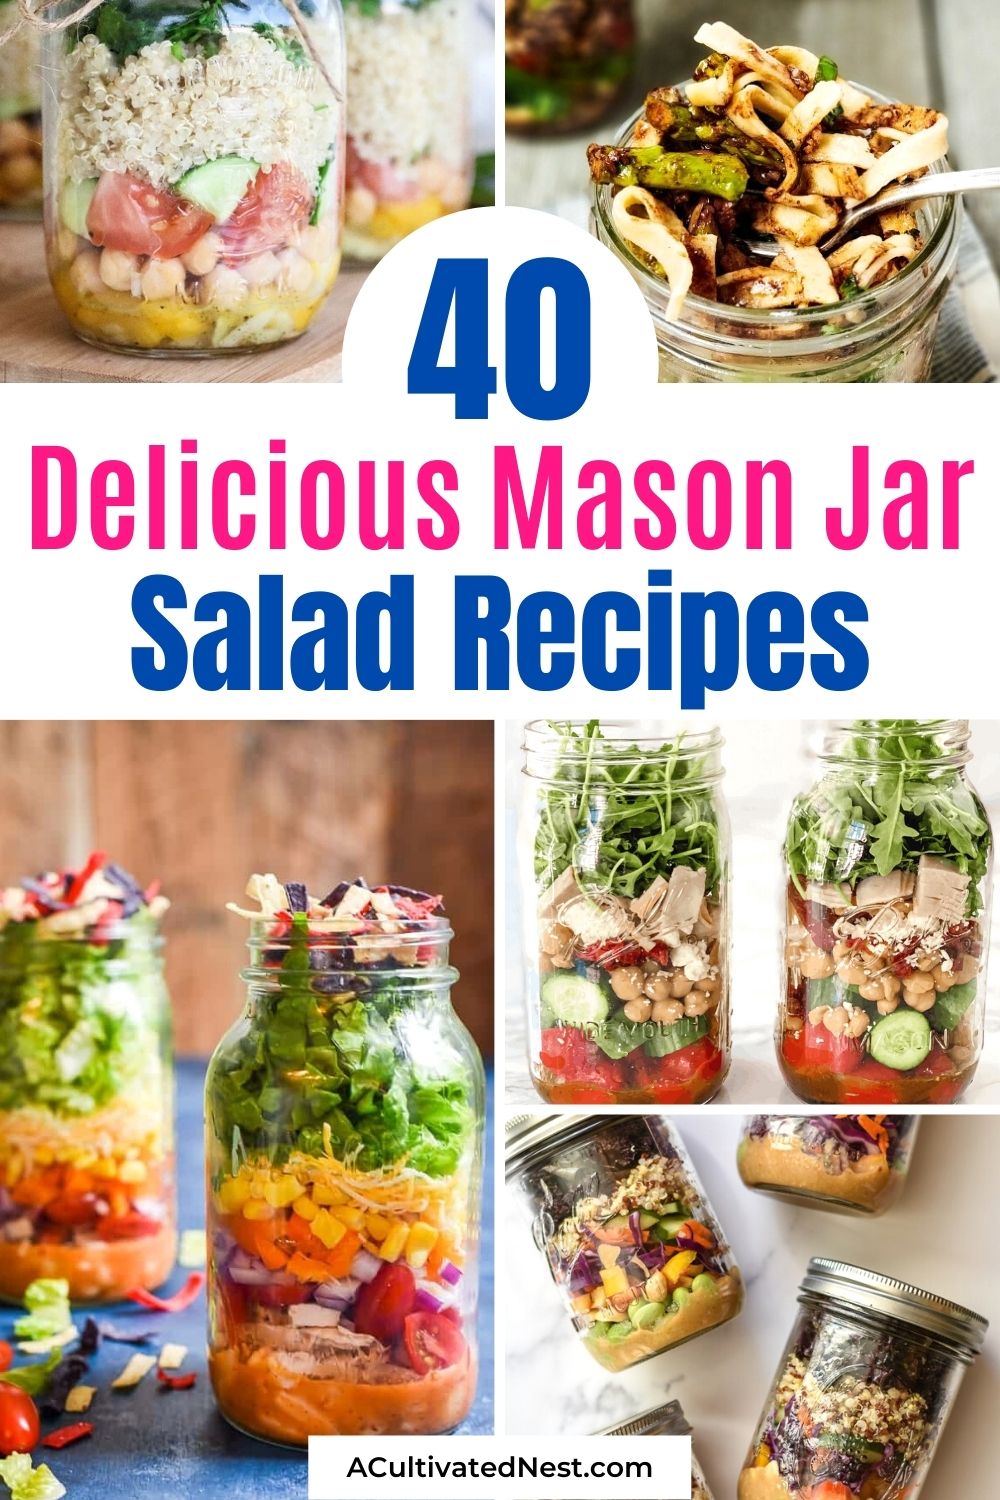 40 Delicious Mason Jar Salad Recipes- If you want some ideas for a delicious and healthy lunch to take on the go, check out these delicious Mason jar salad recipes! | #salad #masonJarSalads #masonJarRecipes #lunchRecipes #ACulitvatedNest